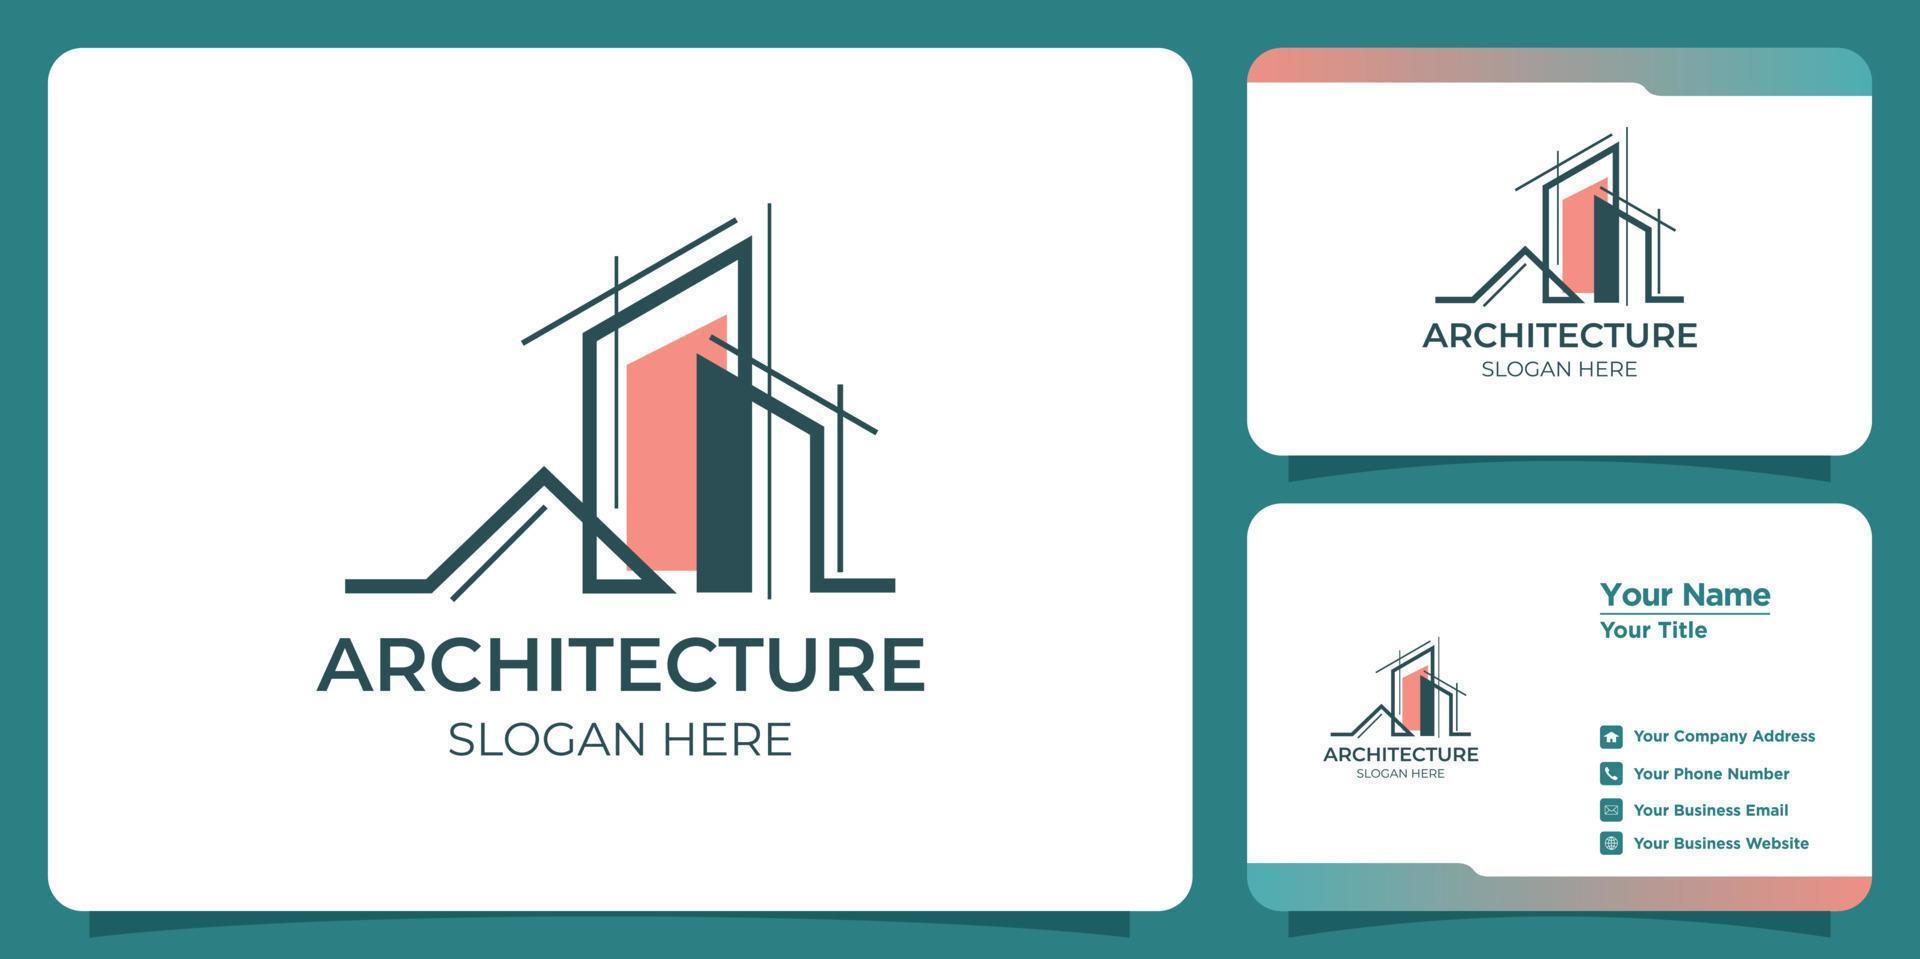 Minimalist architectural logo with art style logo design and business card template vector